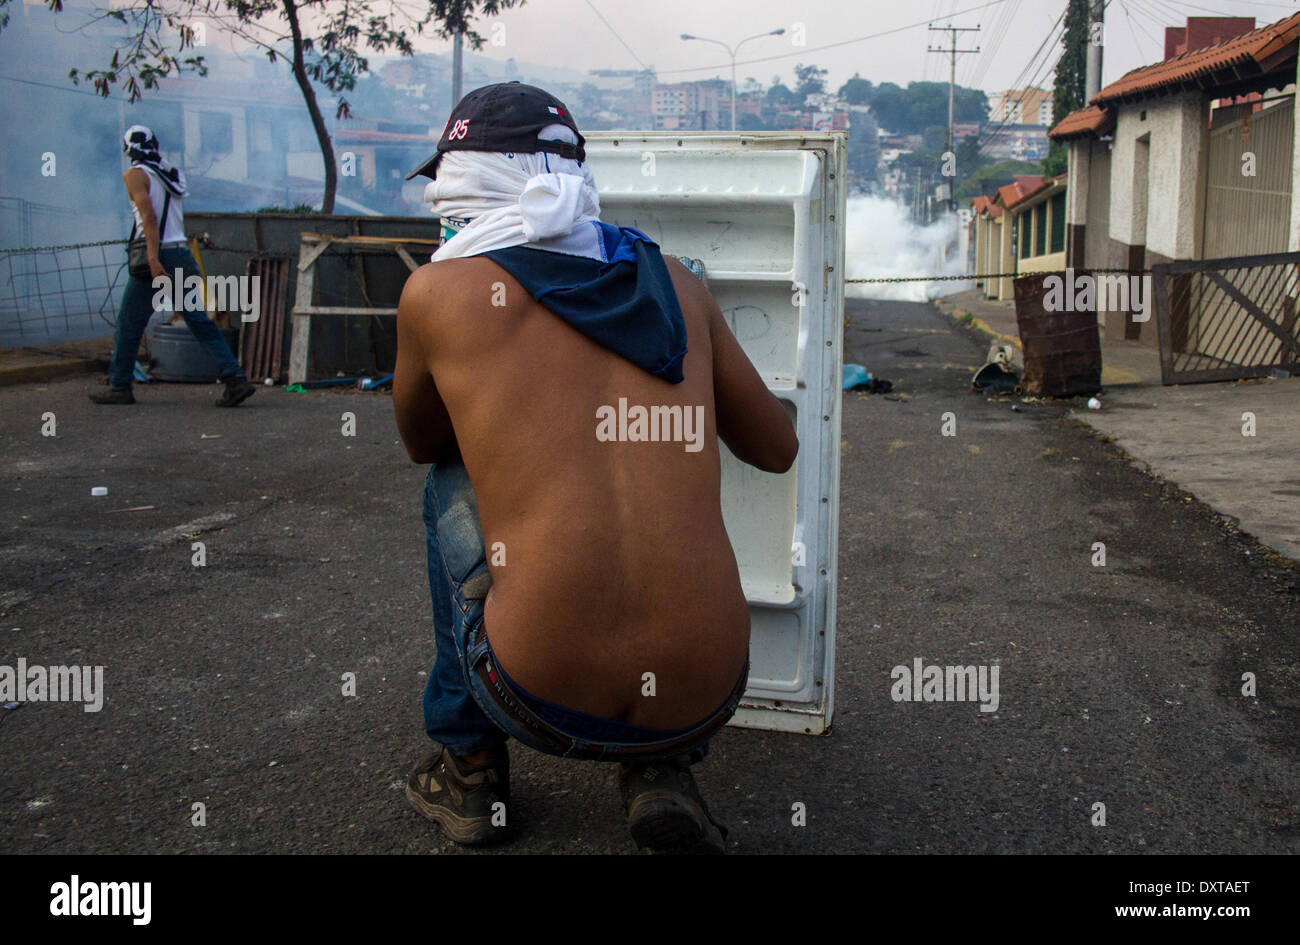 Tachira, Venezuela. 30th Mar, 2014. Demonstrators clash with elements of the Bolivarian National Guard during a protest in Tachira, Venezuela, on March 30, 2014. © Manuel Hernandez/Xinhua/Alamy Live News Stock Photo